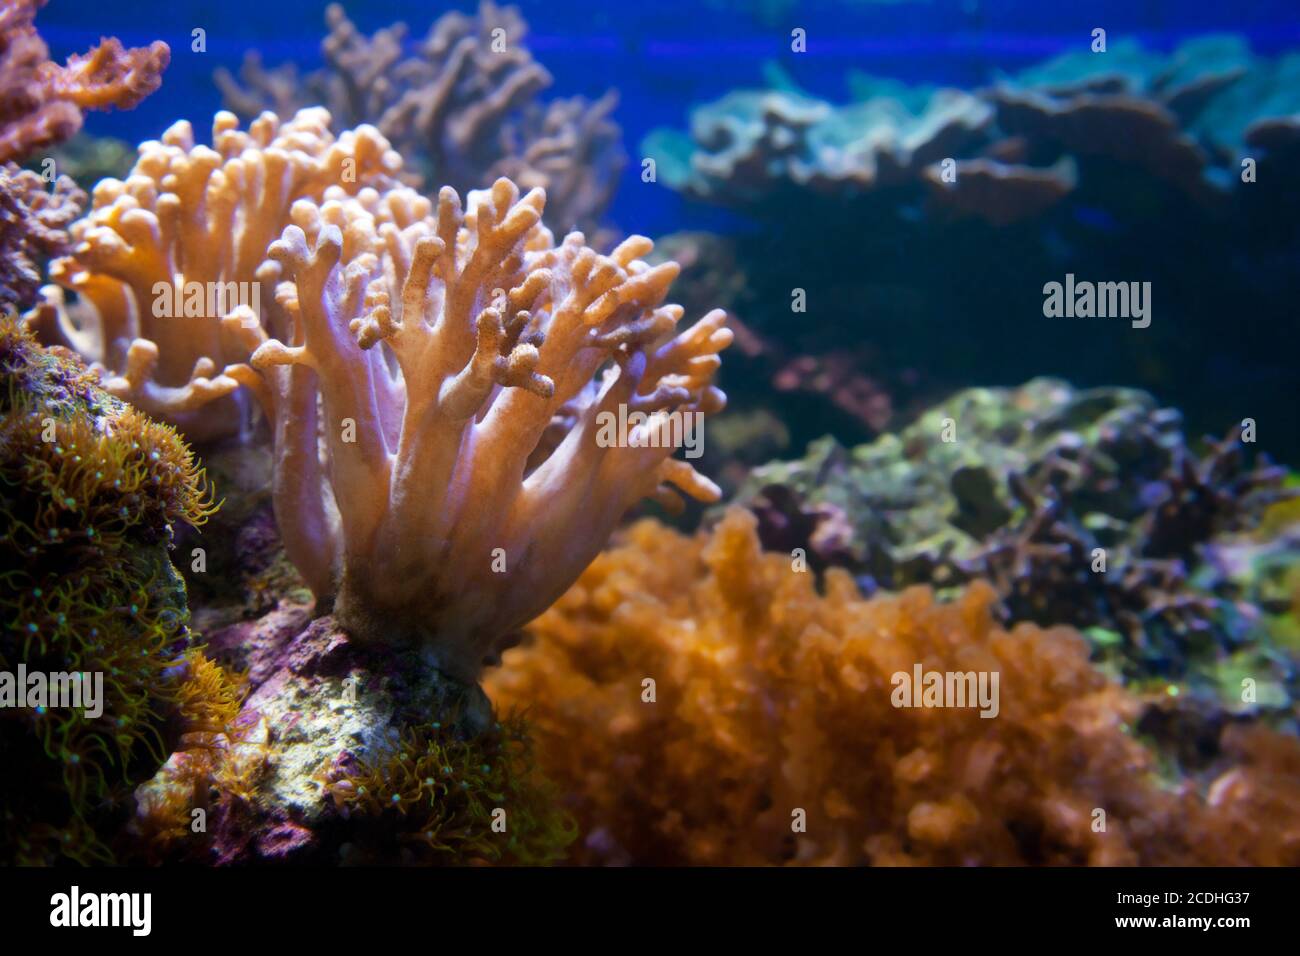 Underwater life. Coral reef, fish. Stock Photo